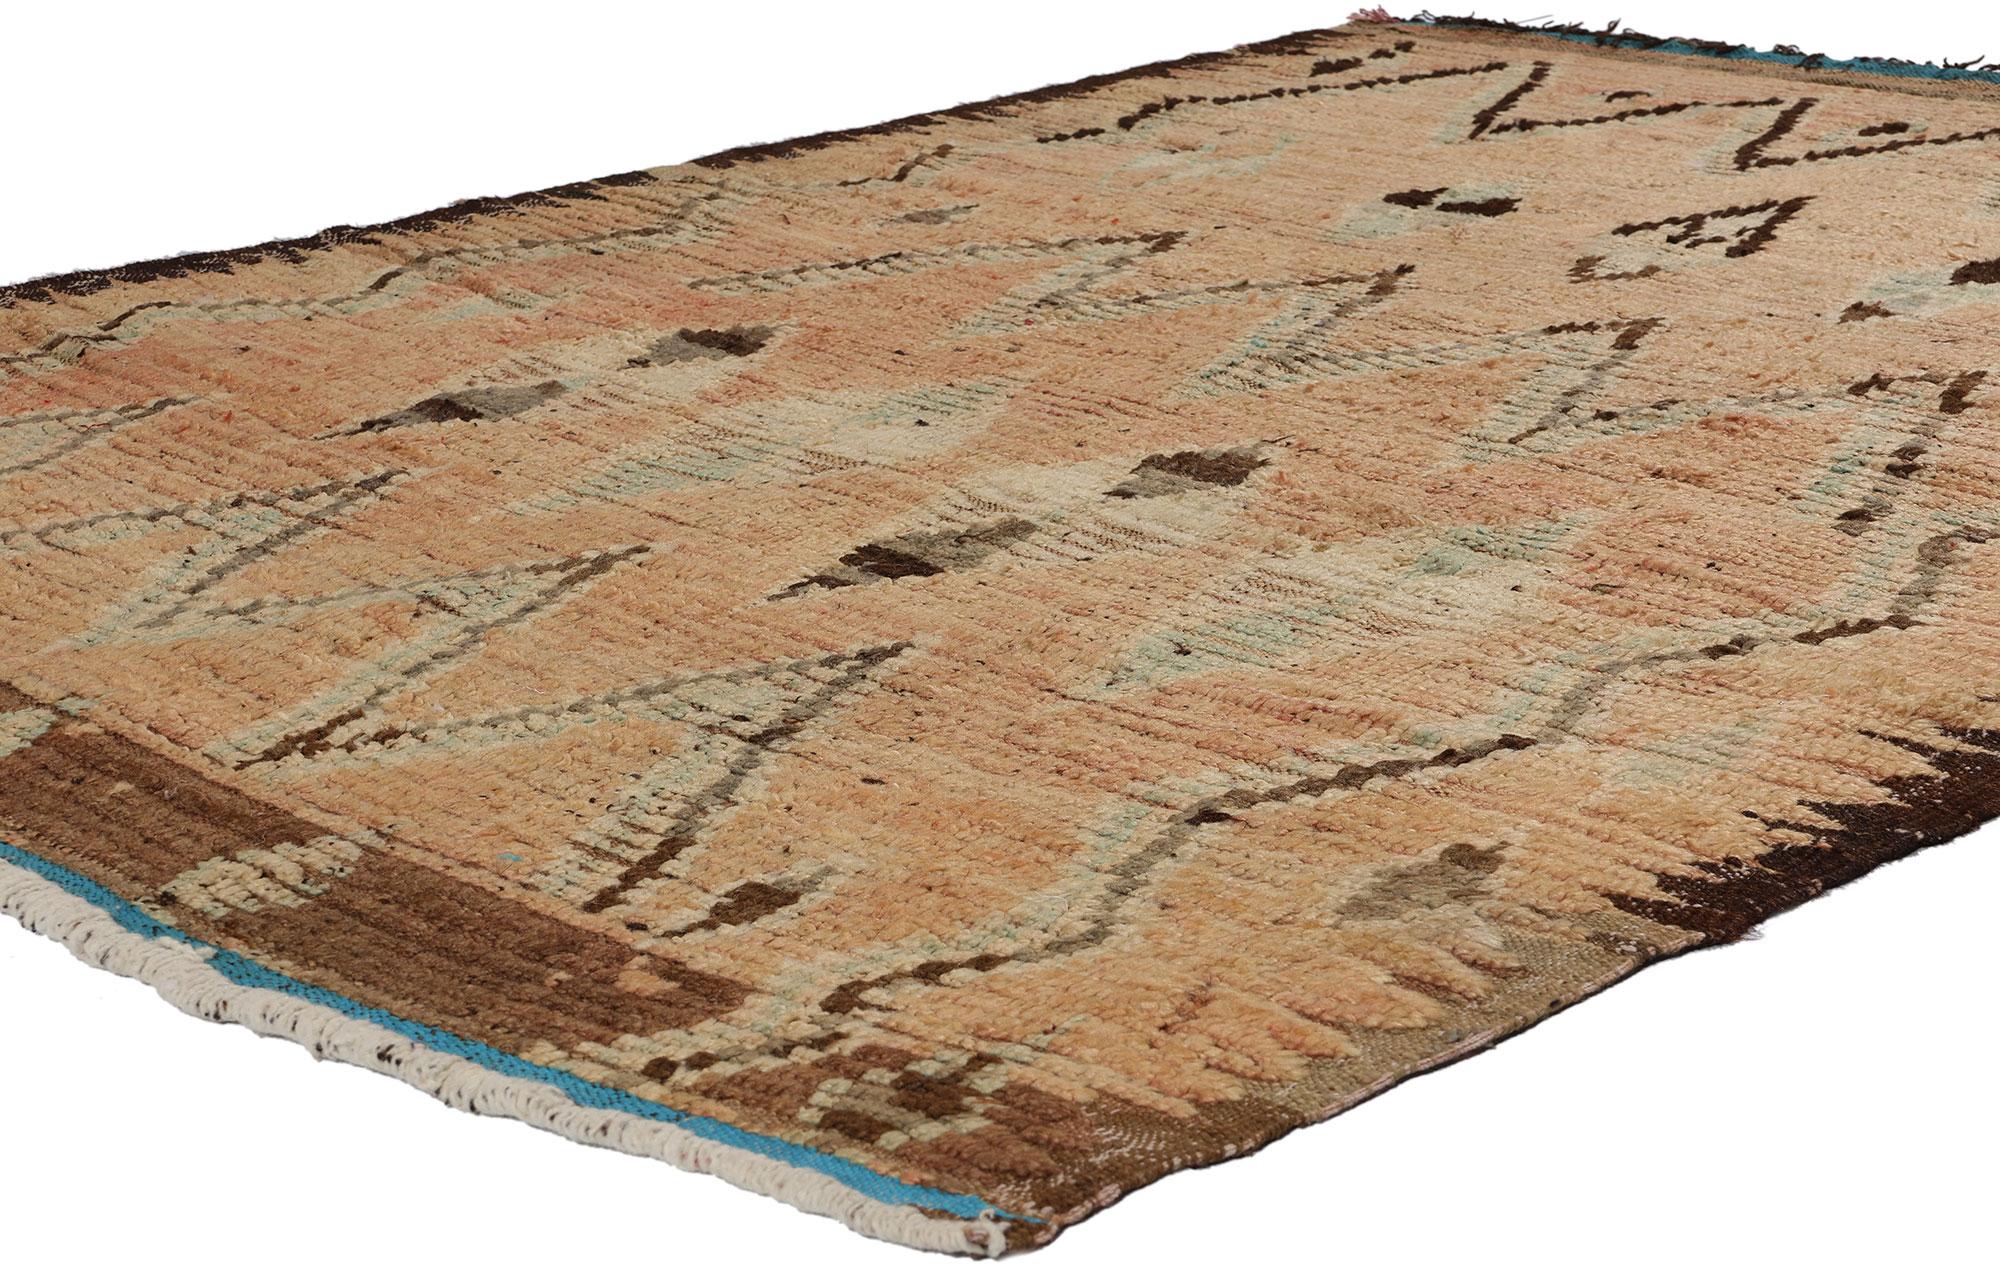 21725 Vintage Earth-Tone Moroccan Azilal Rug, 04'07 x 06'06. Handwoven by skilled Berber artisans in the Azilal region of Morocco, Earth-Tone Moroccan Azilal rugs boast a palette inspired by nature's earthy hues, setting them apart from the vibrant